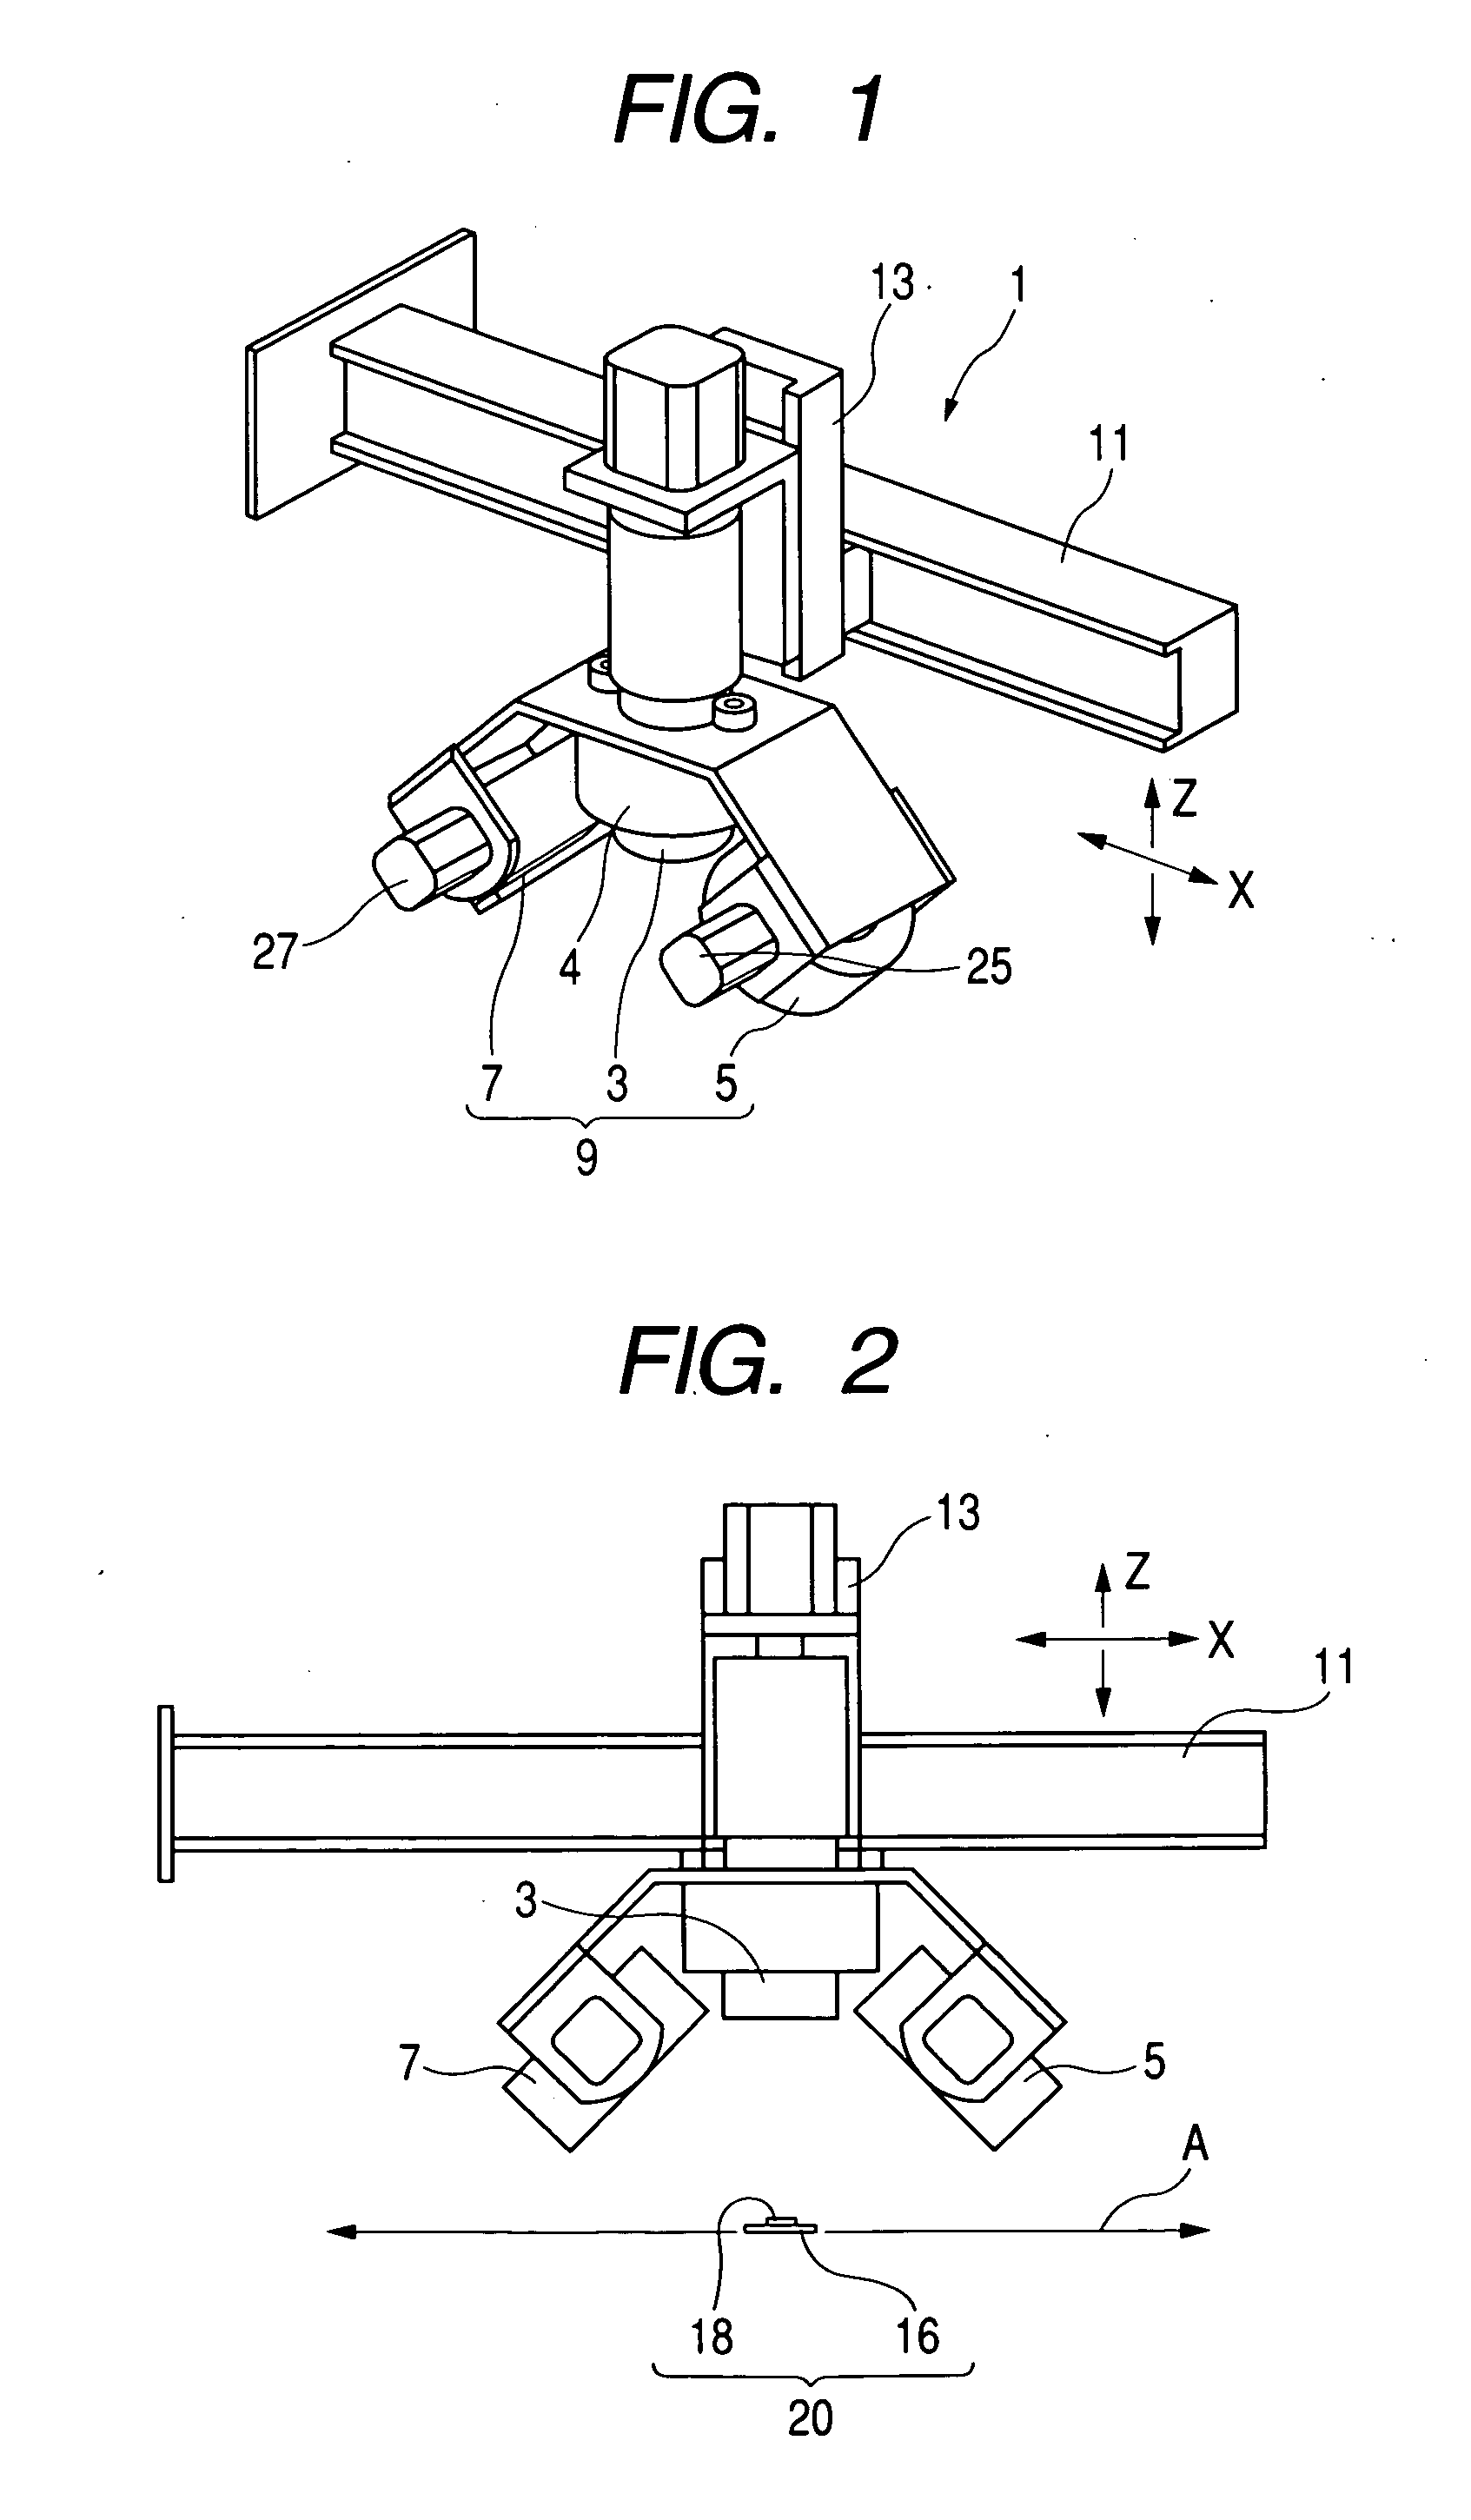 Inspection apparatus and inspection method